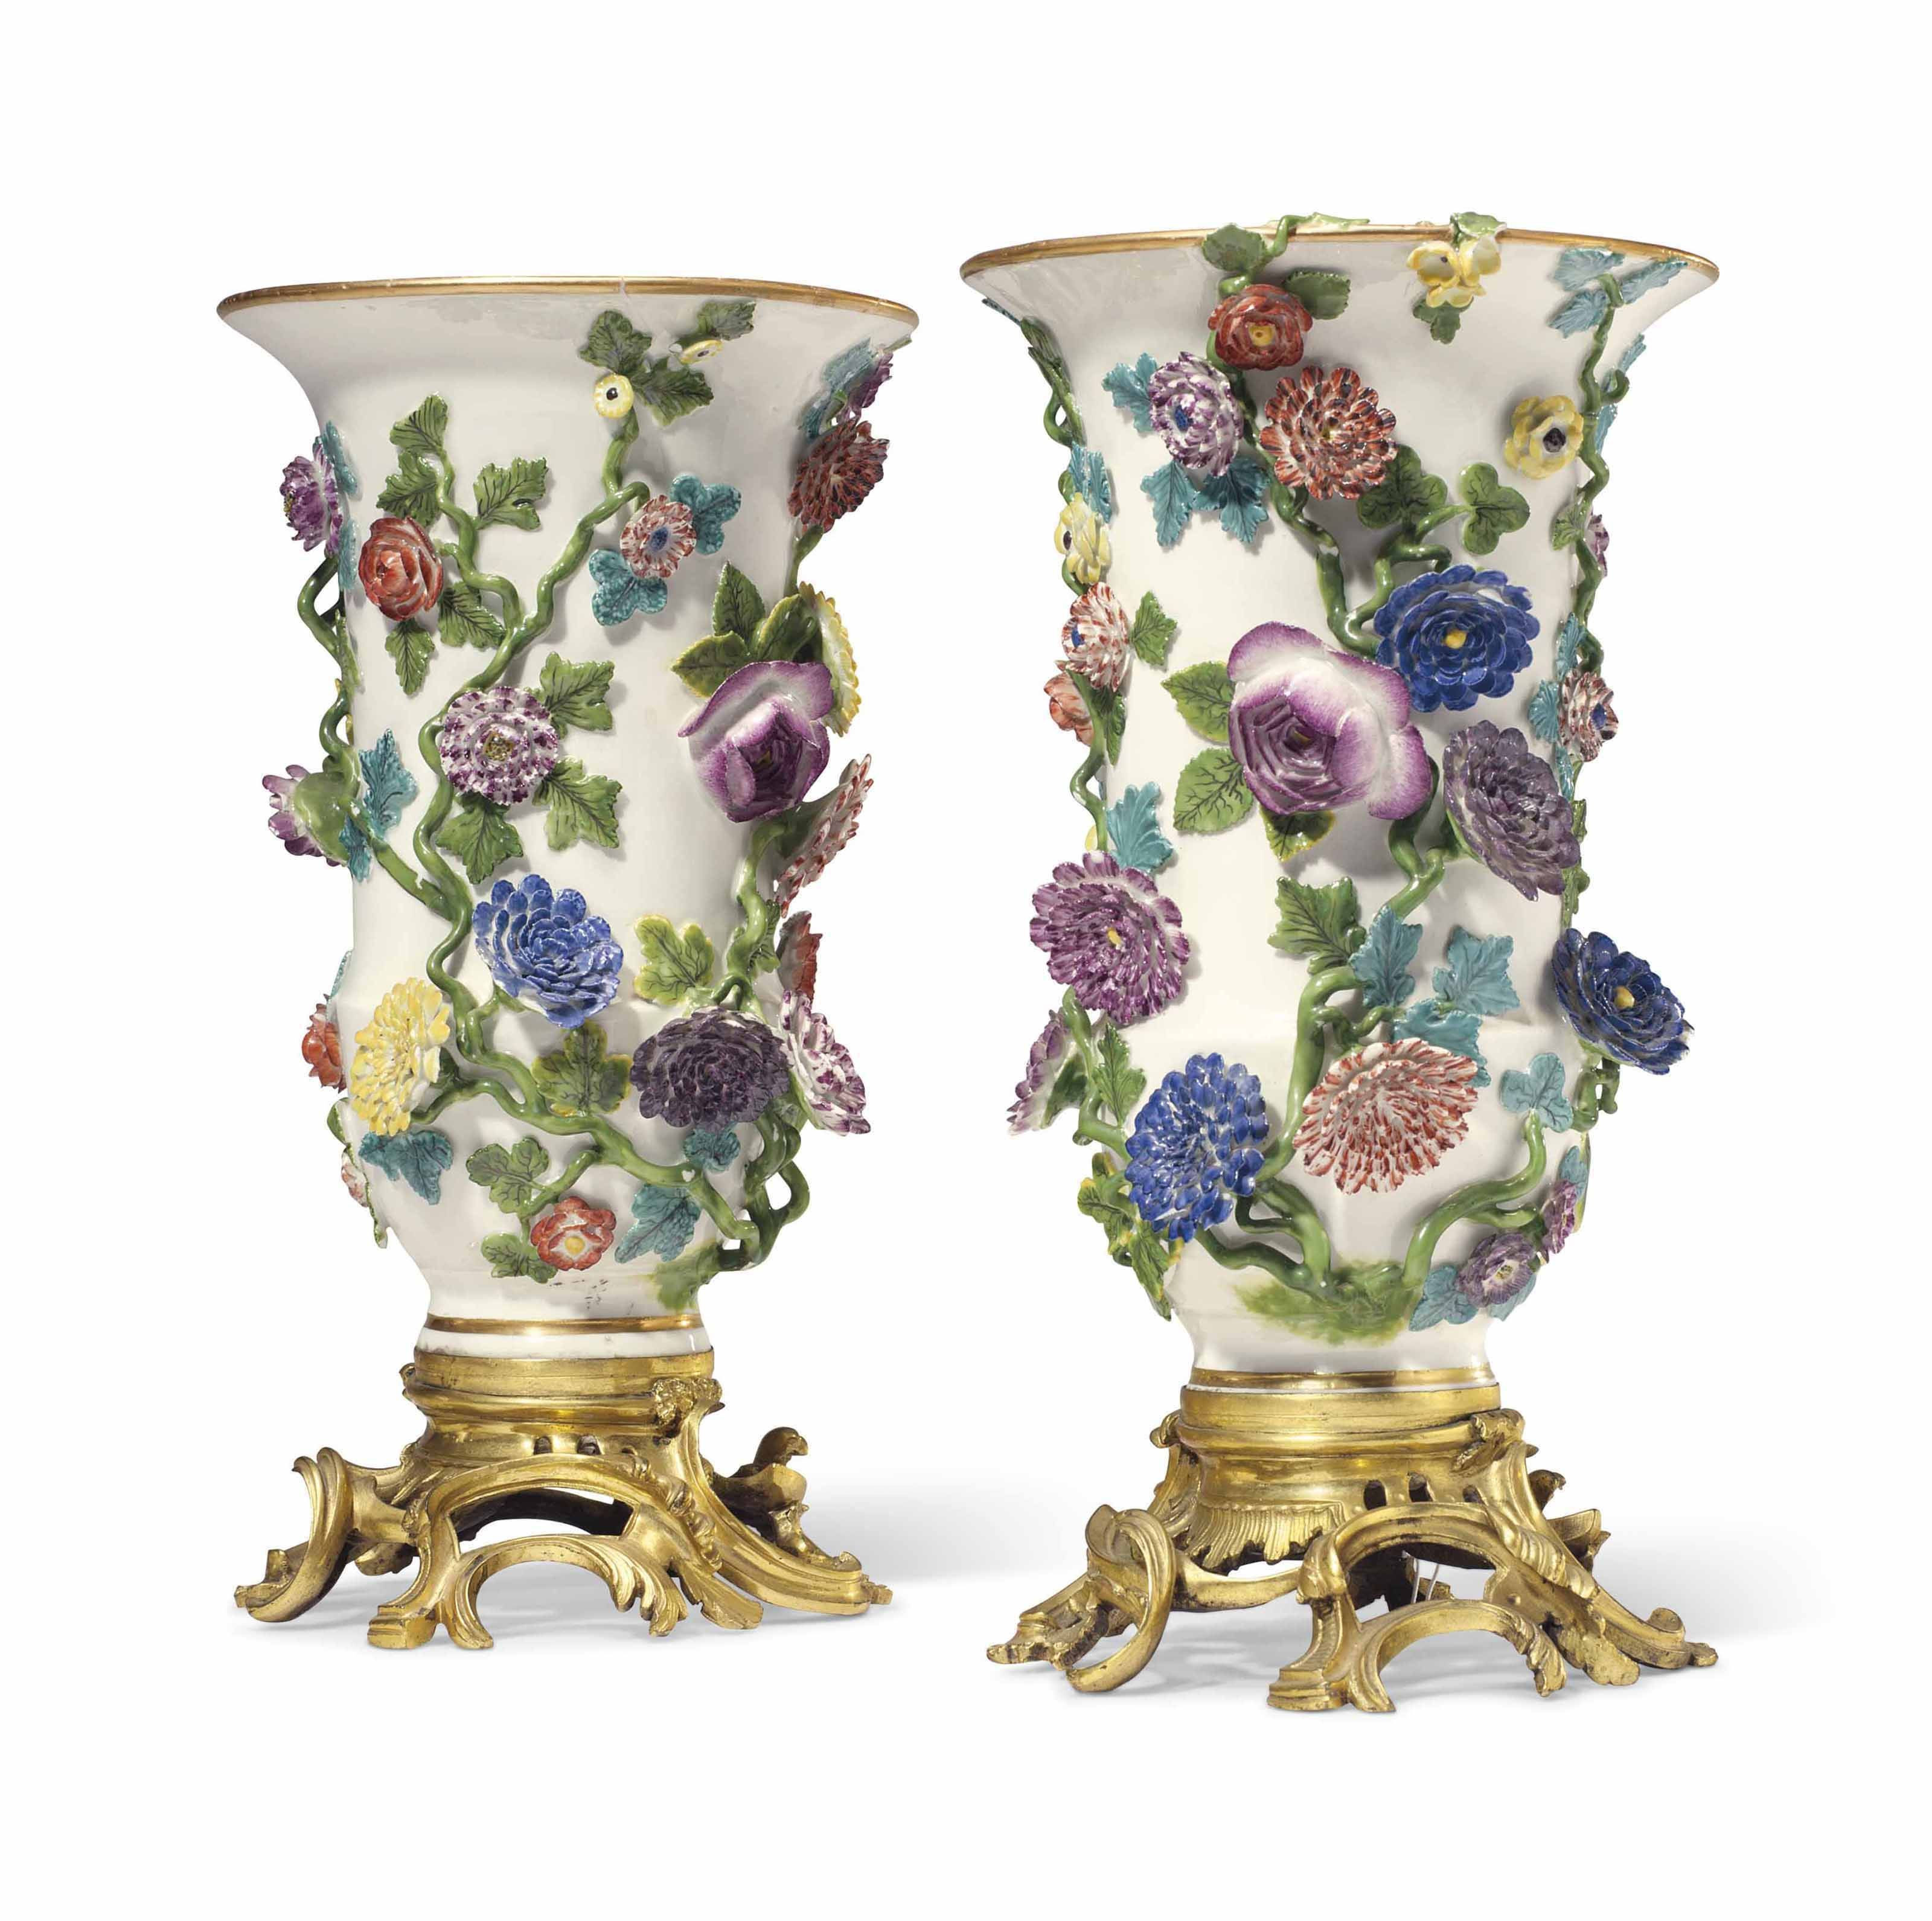 water beads for flower vases of 23 crystal beaded vase the weekly world with regard to a pair of ormolu mounted meissen porcelain flower encrusted vases